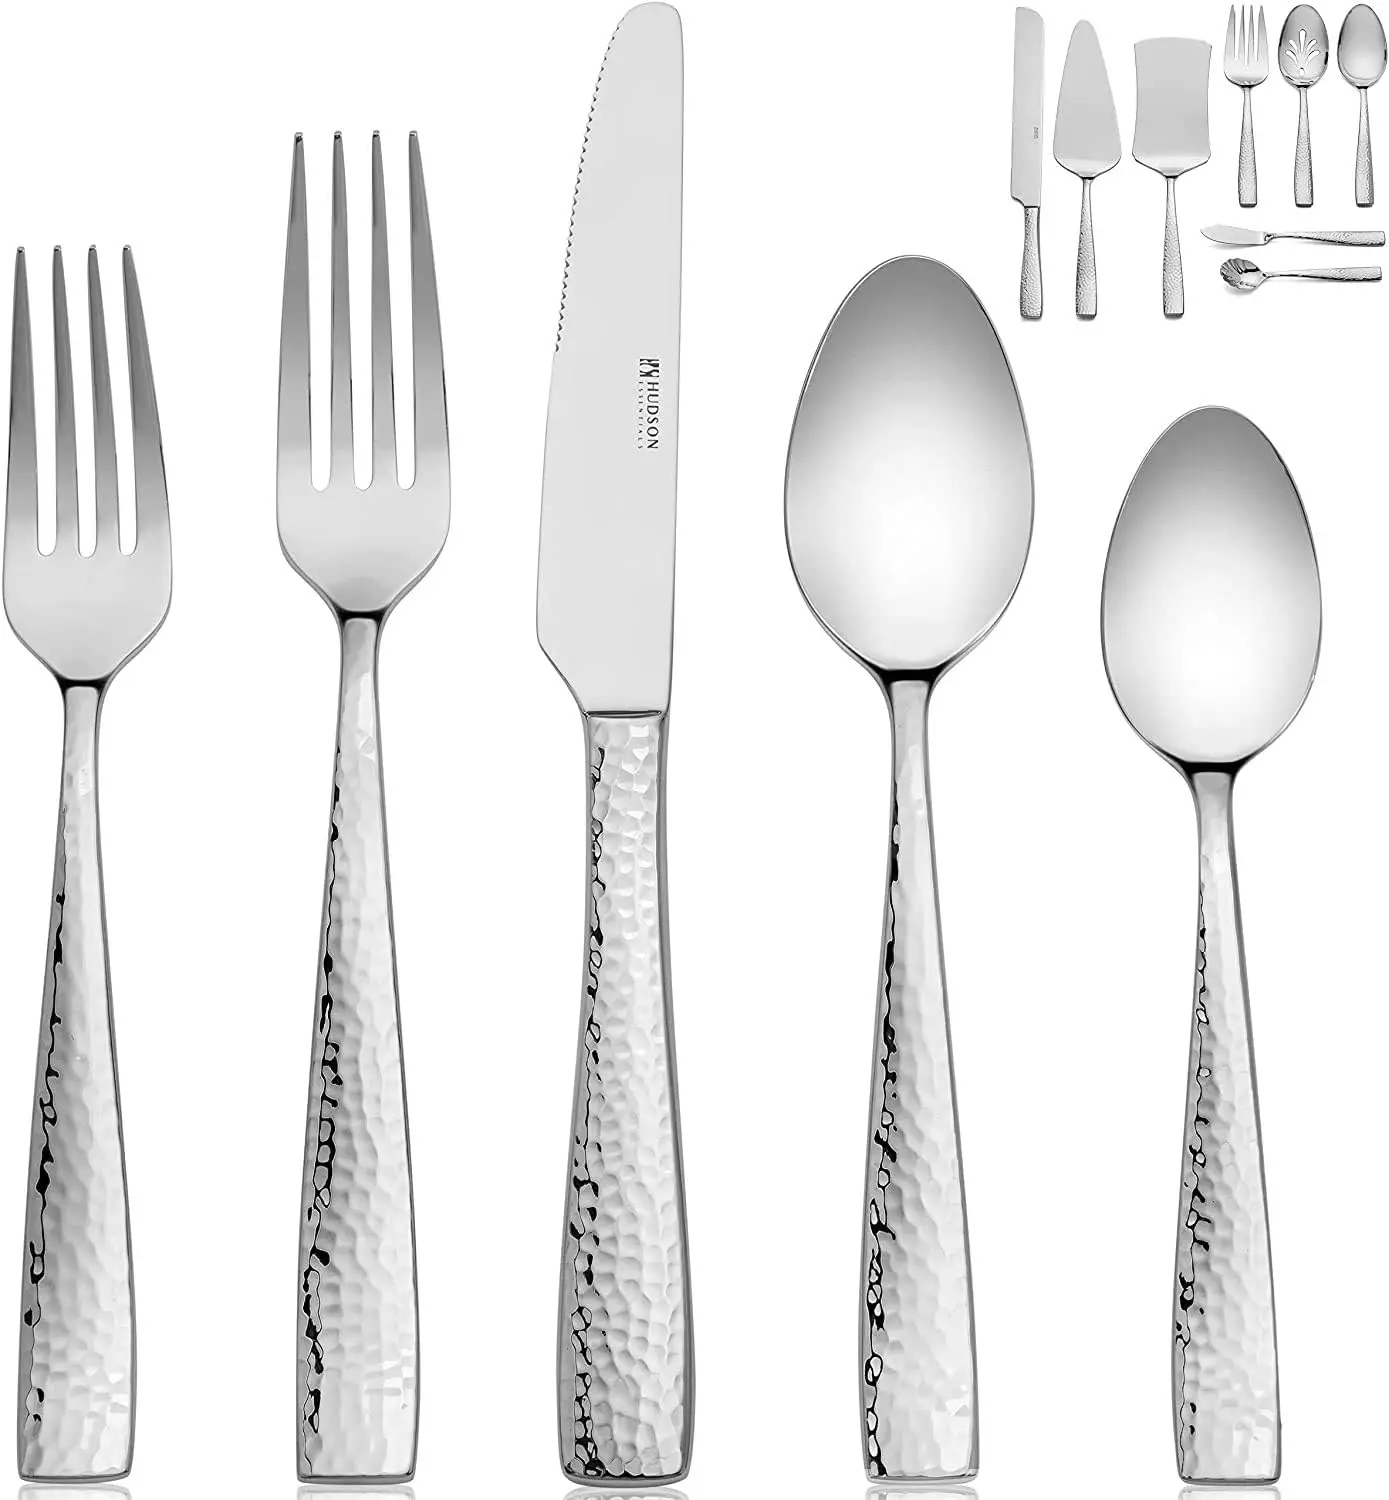 

Hammered 18/10 Stainless Steel Silverware Cutlery Set with Serving Set and Cake Knife, Flatware Service for 12 ложки вил